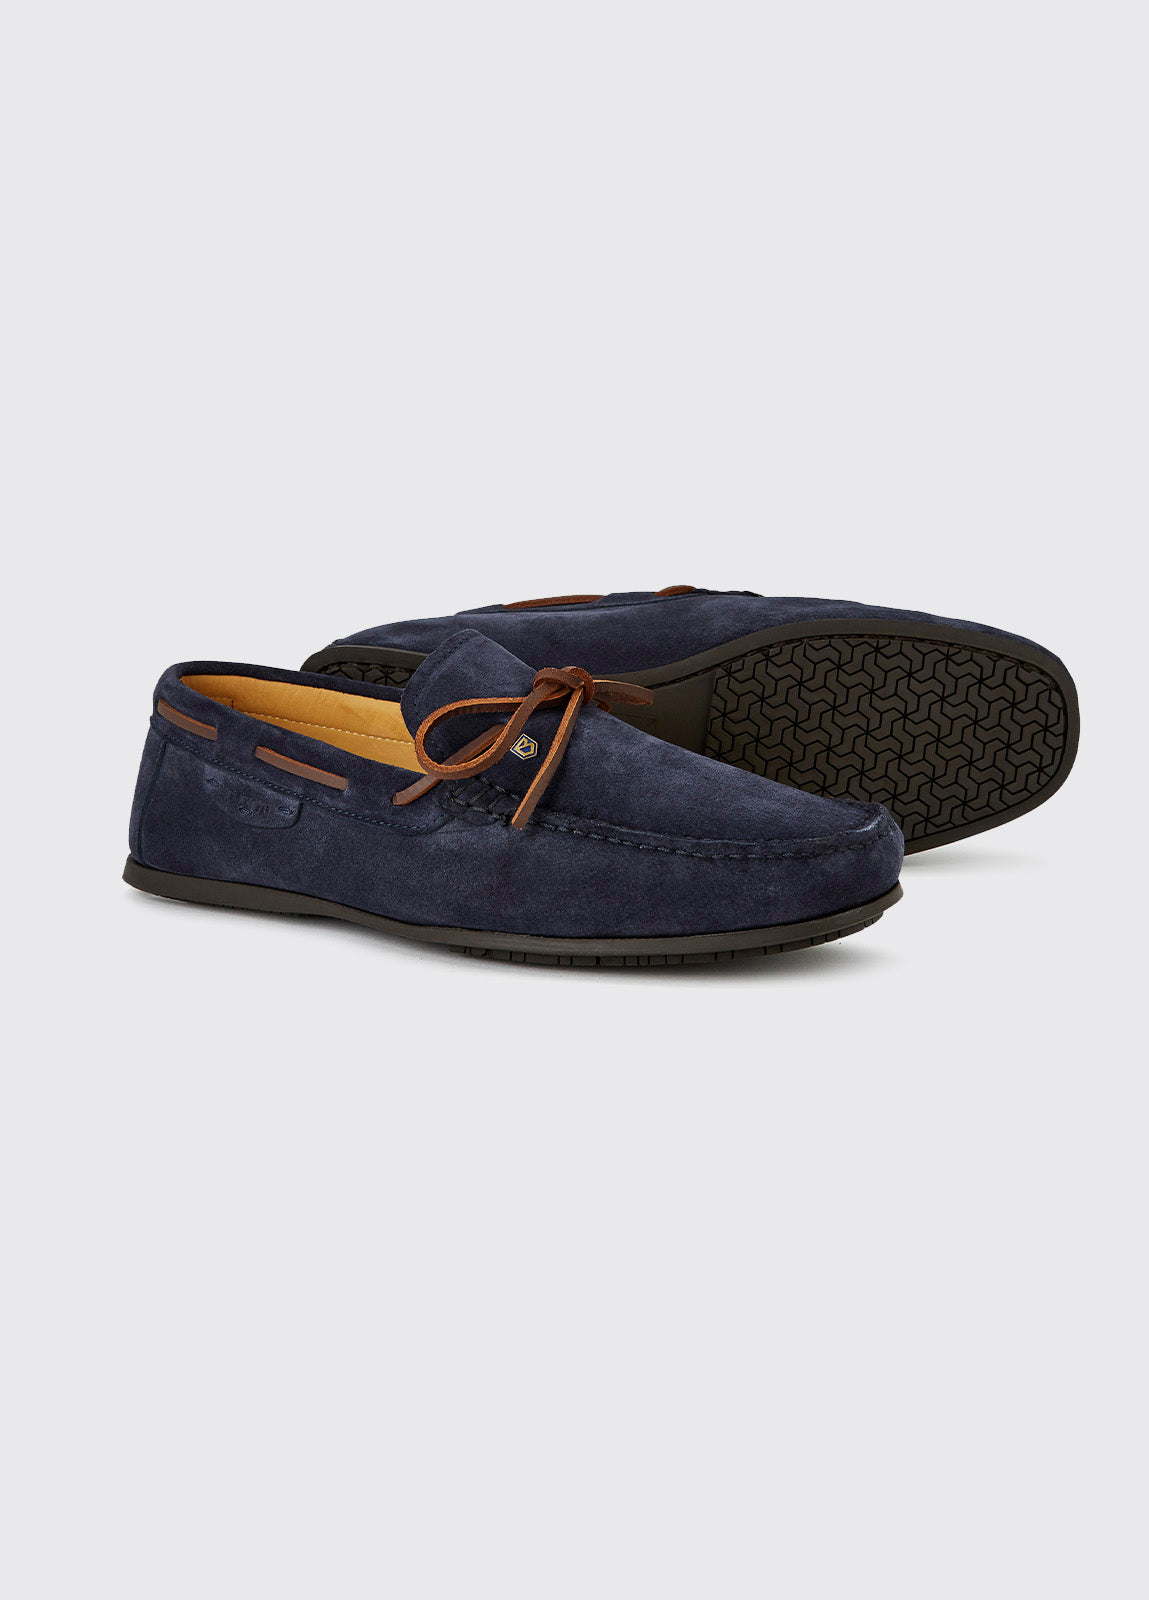 Shearwater Men's Deck Shoes - French Navy